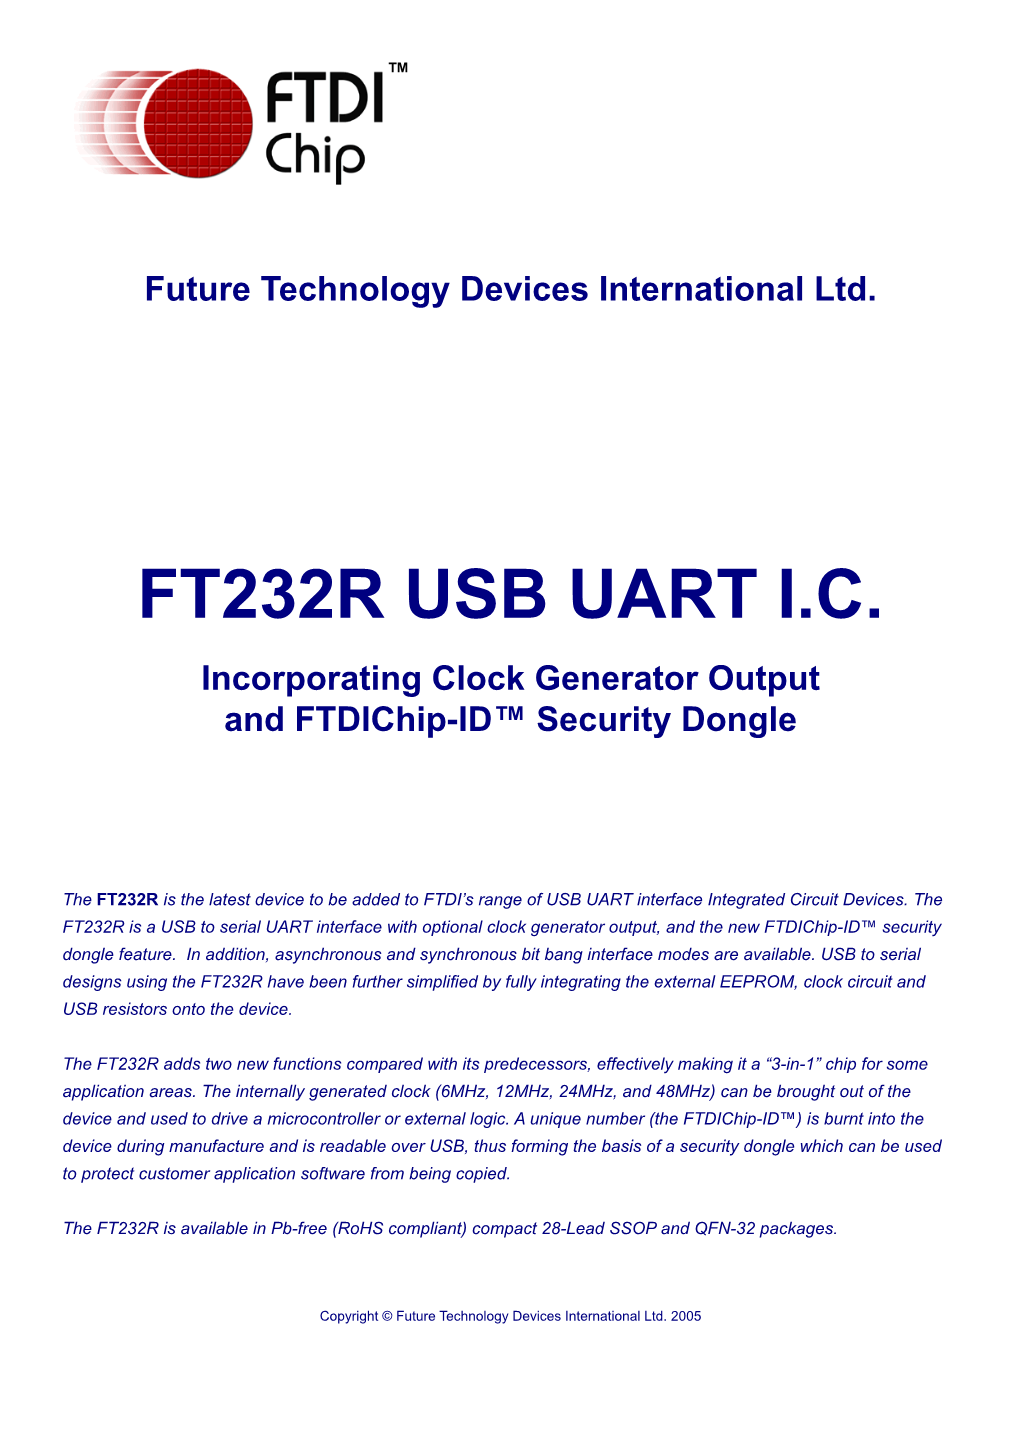 FT232R USB UART I.C. Incorporating Clock Generator Output and Ftdichip-ID™ Security Dongle